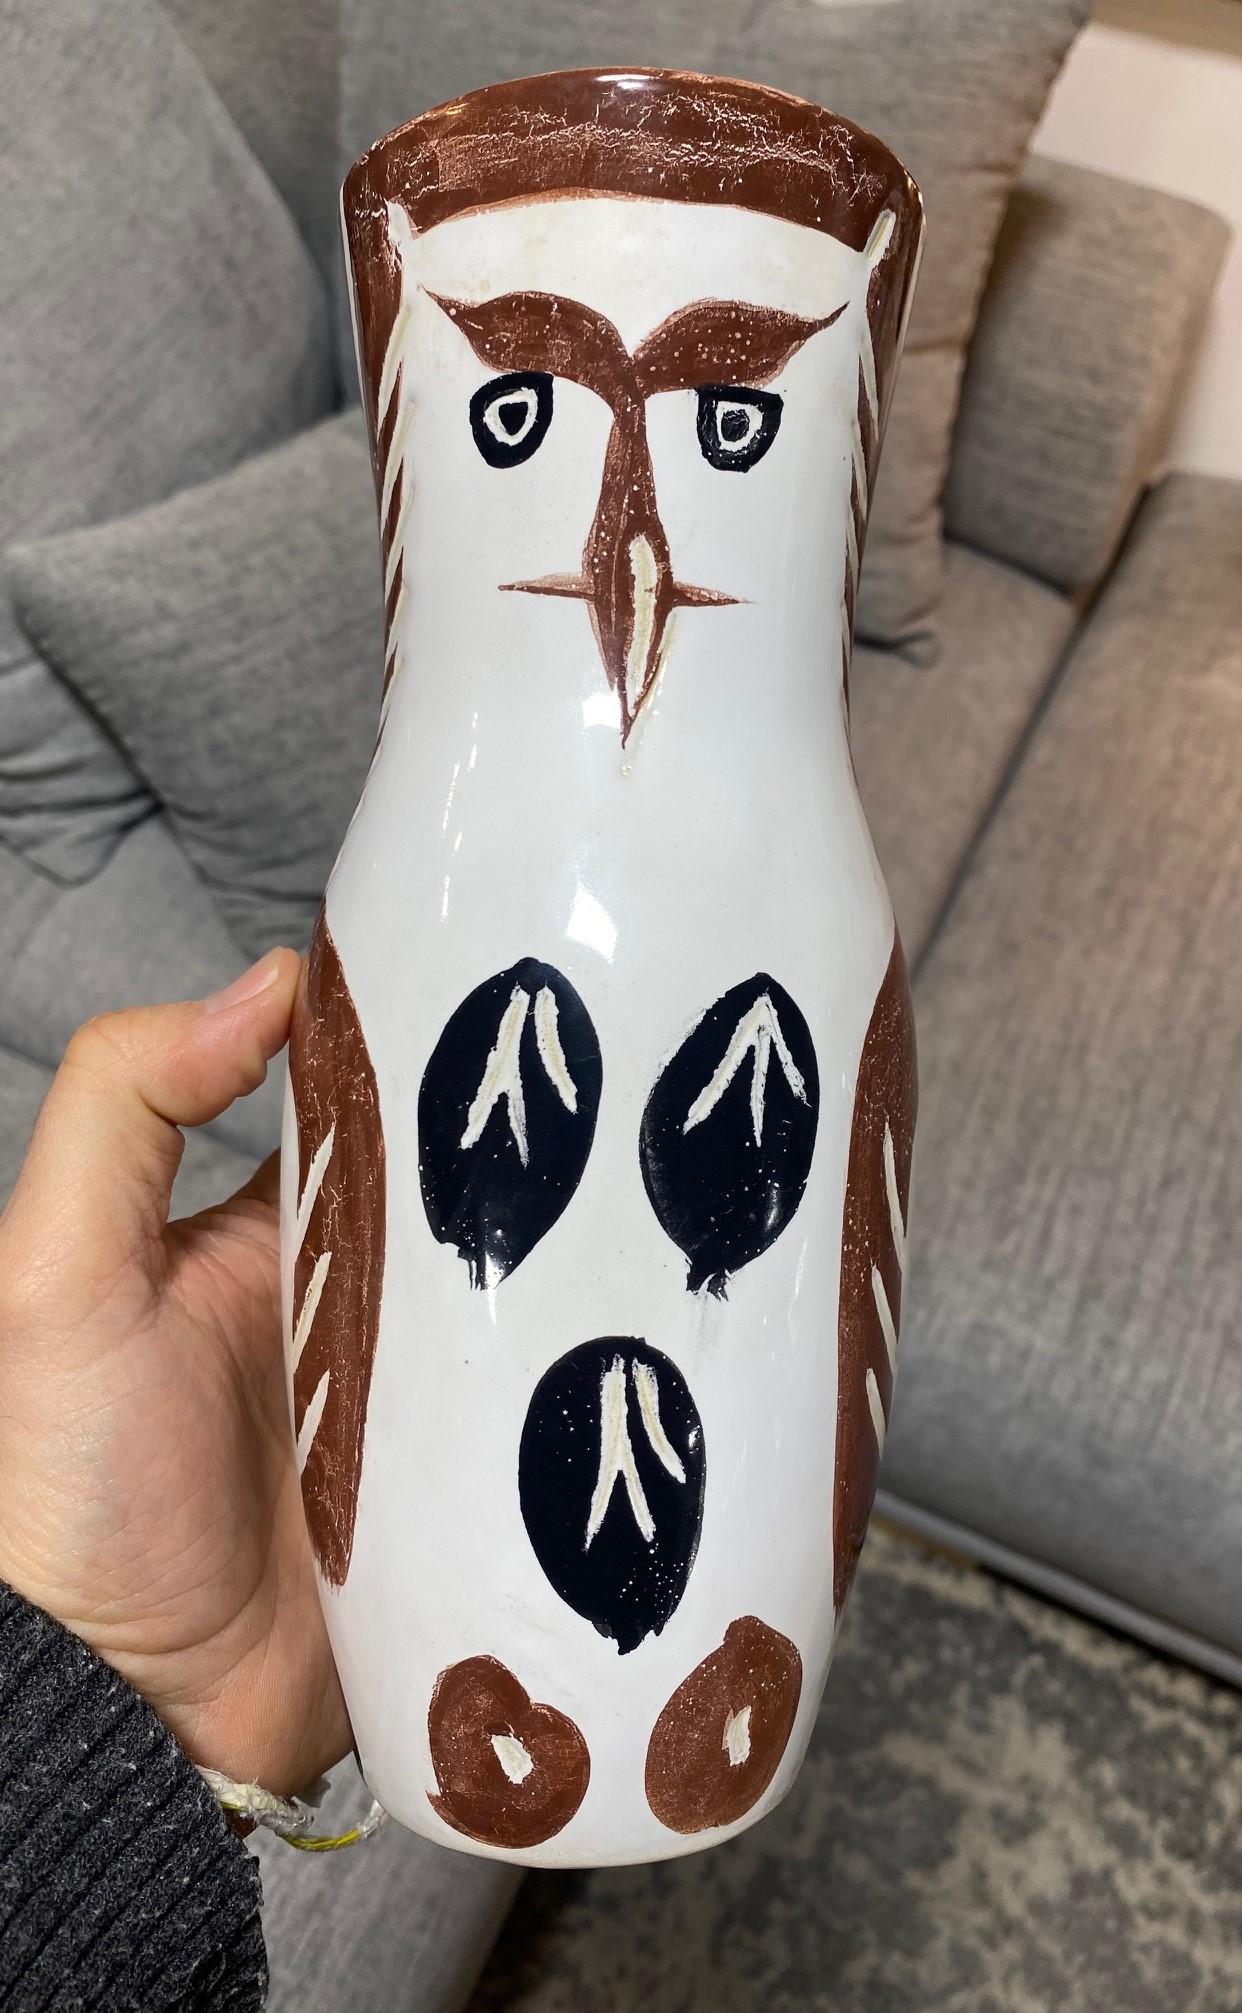 Pablo Picasso Signed Limited Madoura Pottery Chouetton Owl Vase A.R. 135, 1952 For Sale 2